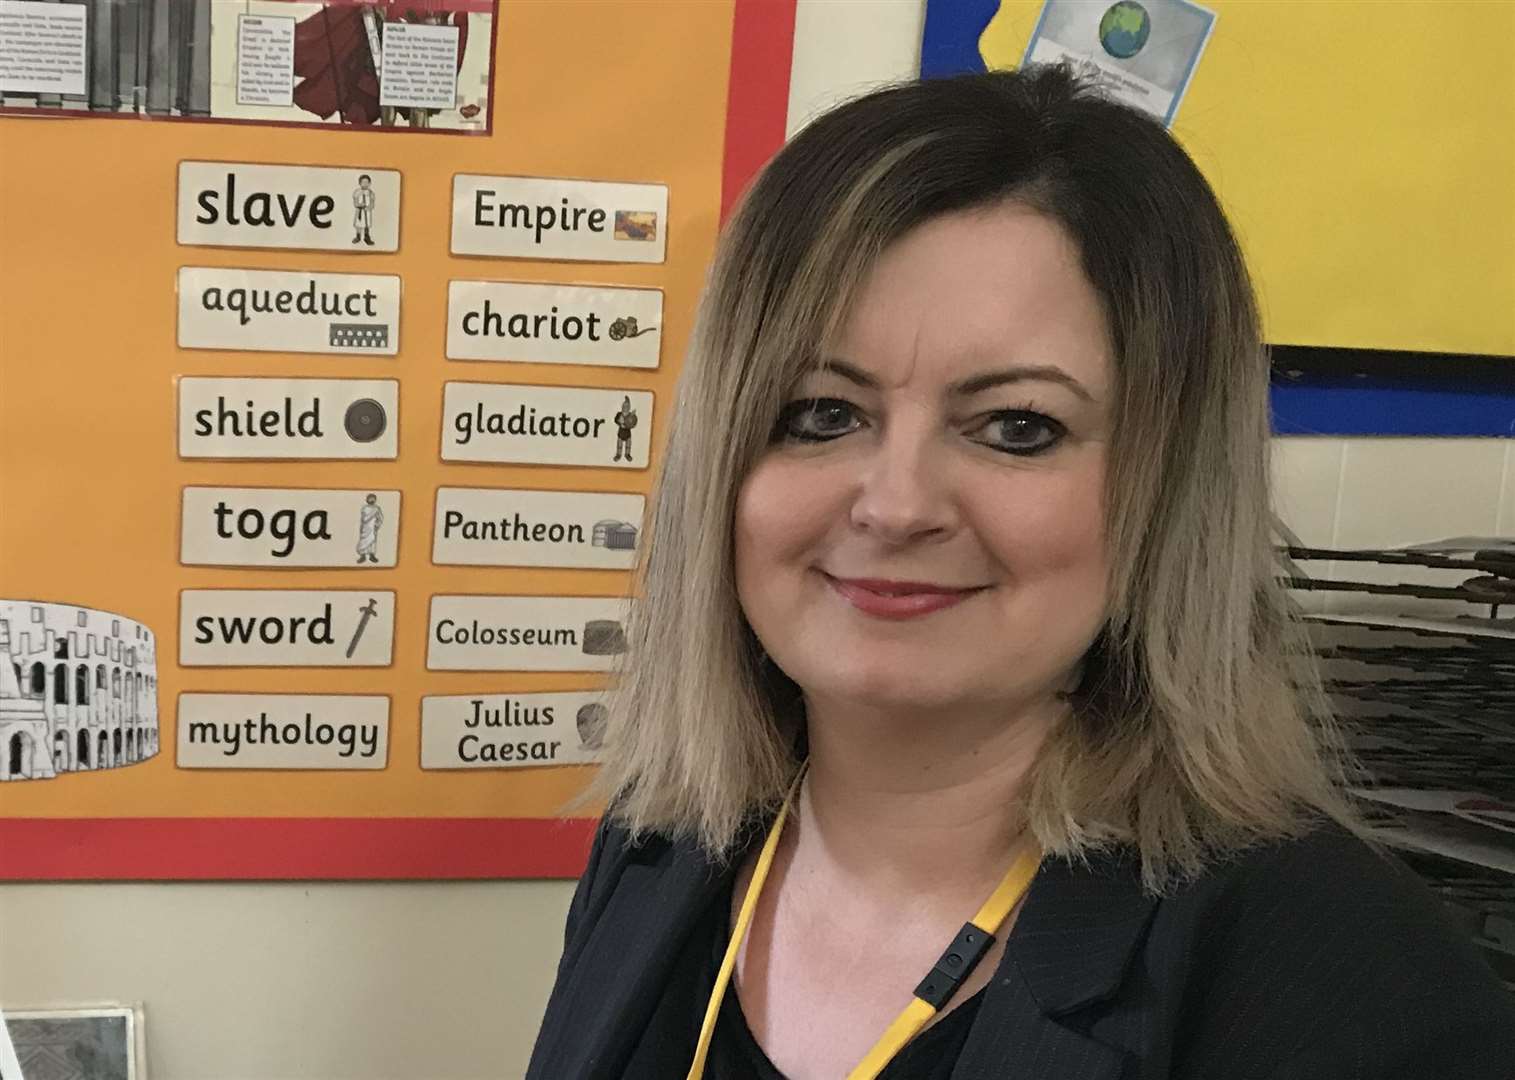 Head teacher at Ash Cartwright and Kelsey Primary School Fiona Crascall has confirmed a positive Covid-19 case in its Year 3 bubble